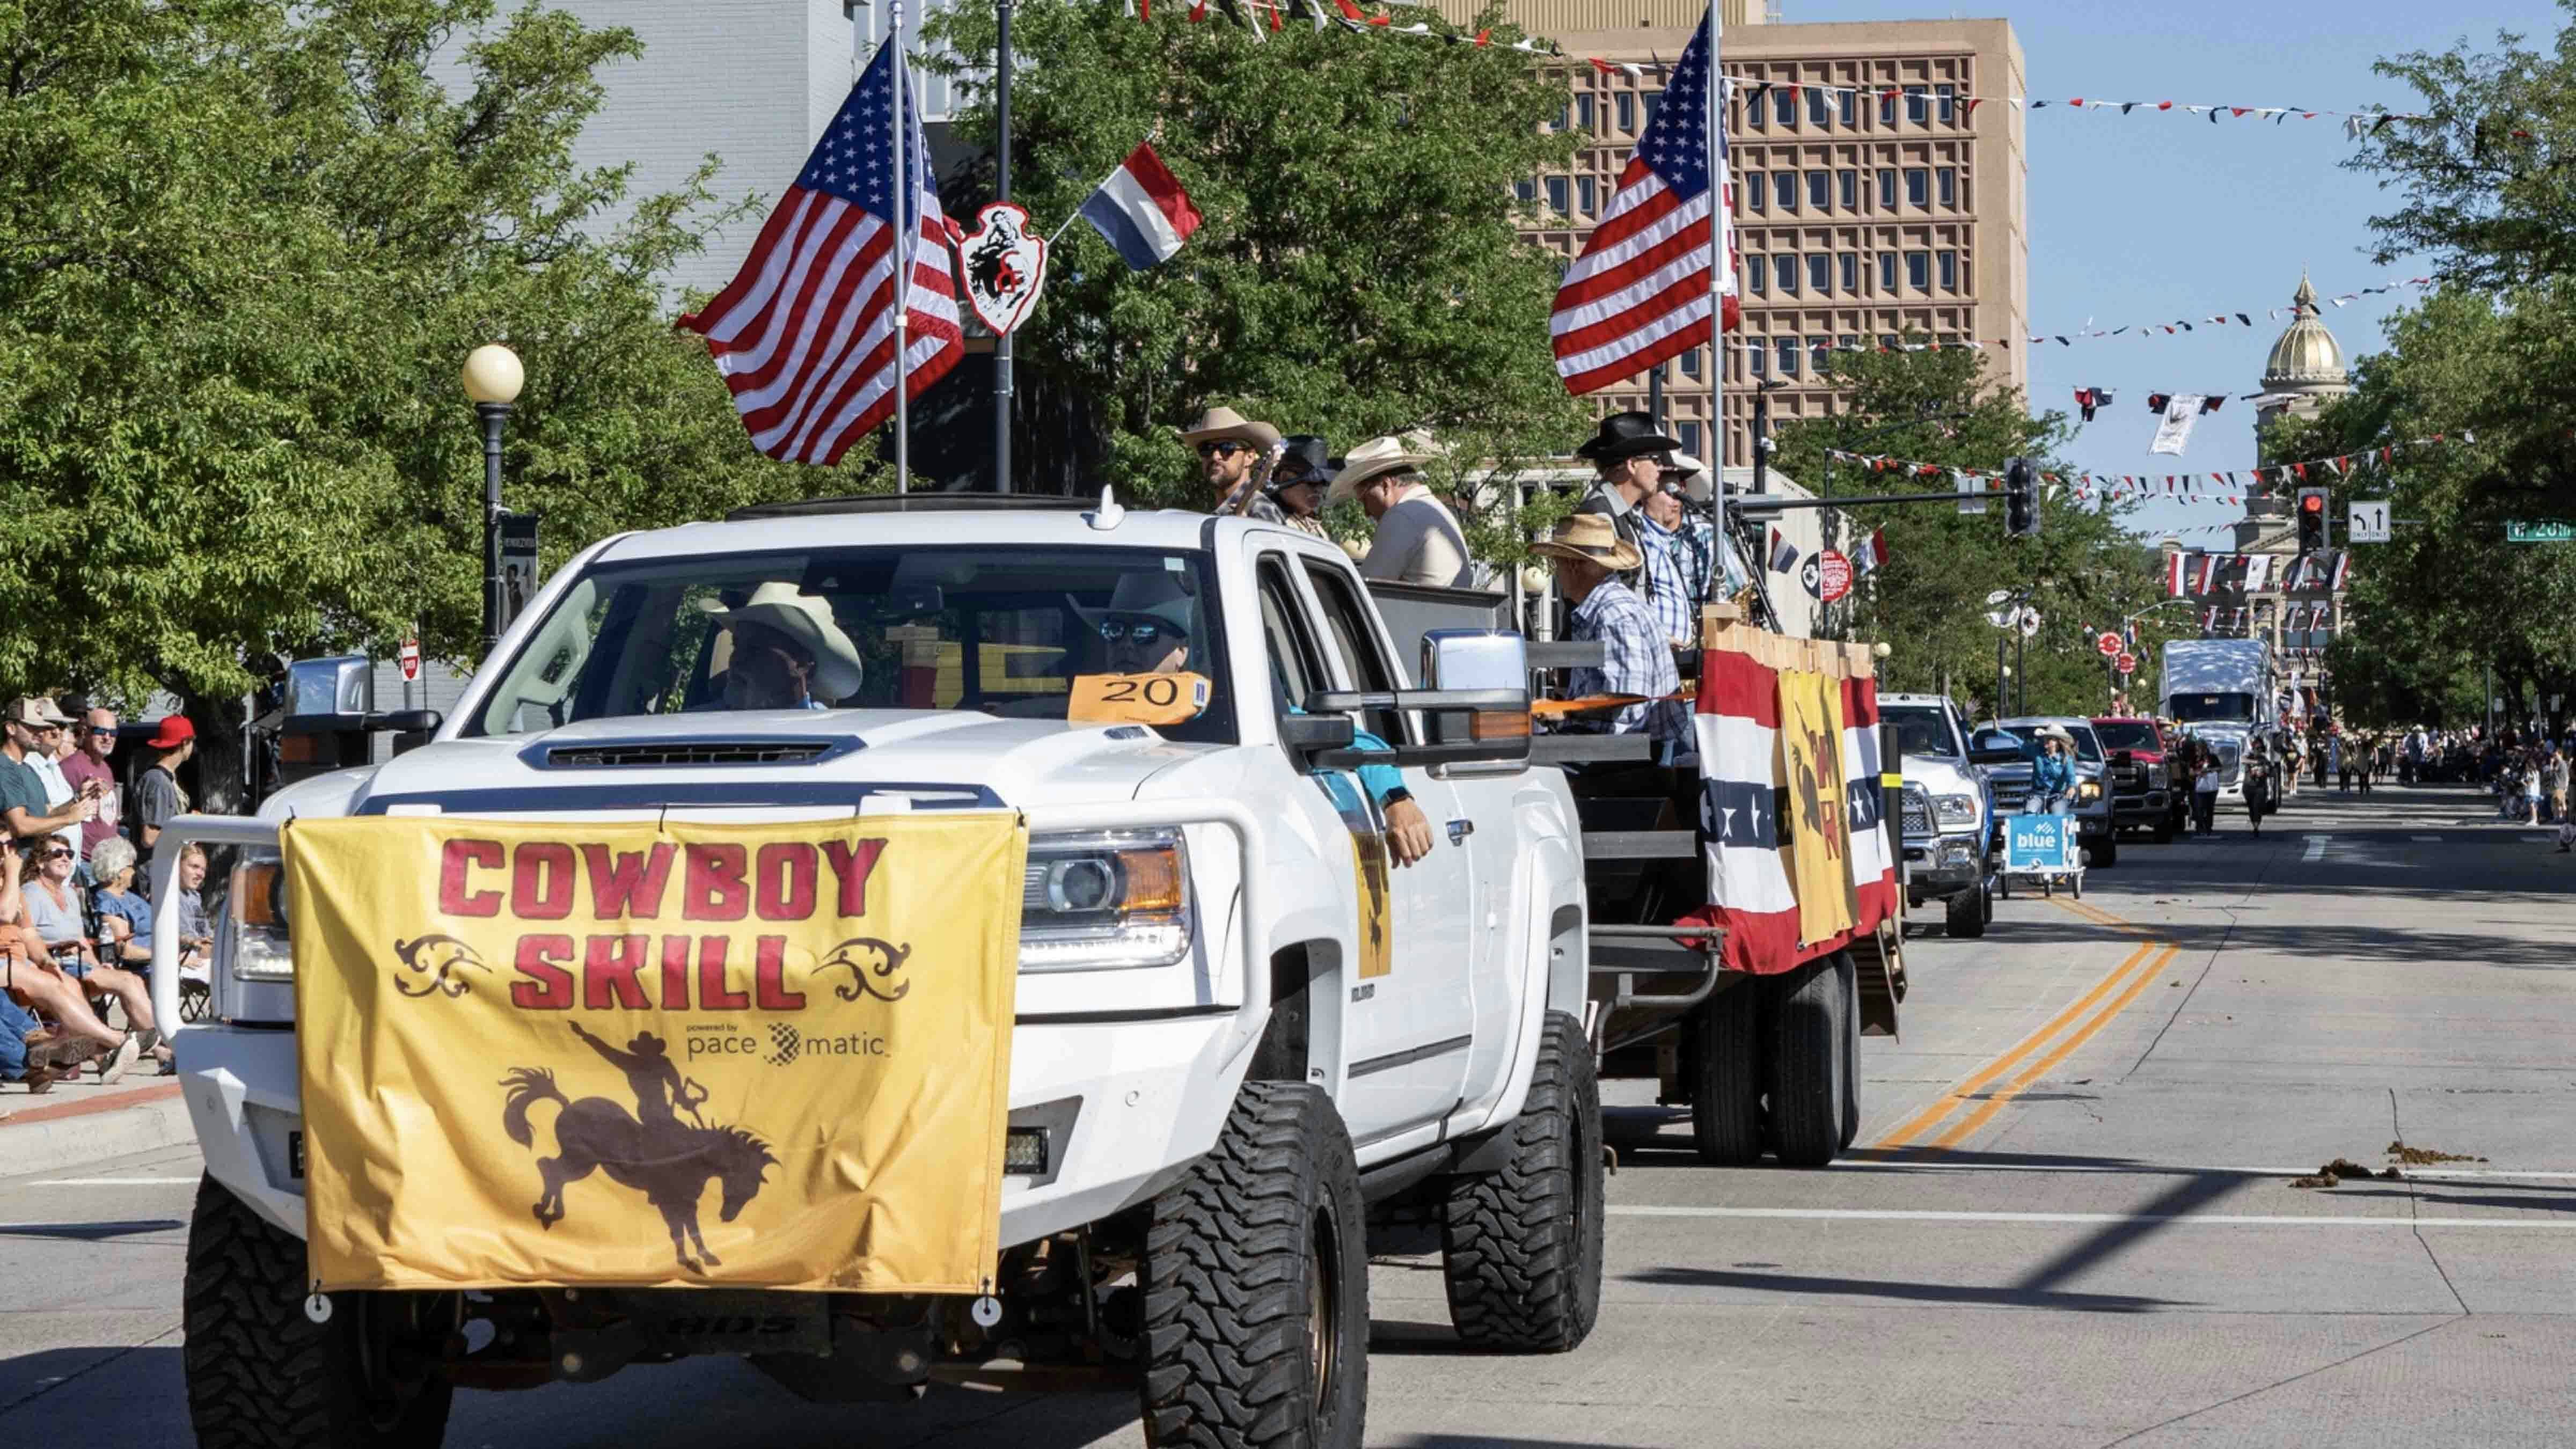 Cowboy Skill Games is a sponsor of the Cheyenne Frontier Days parade